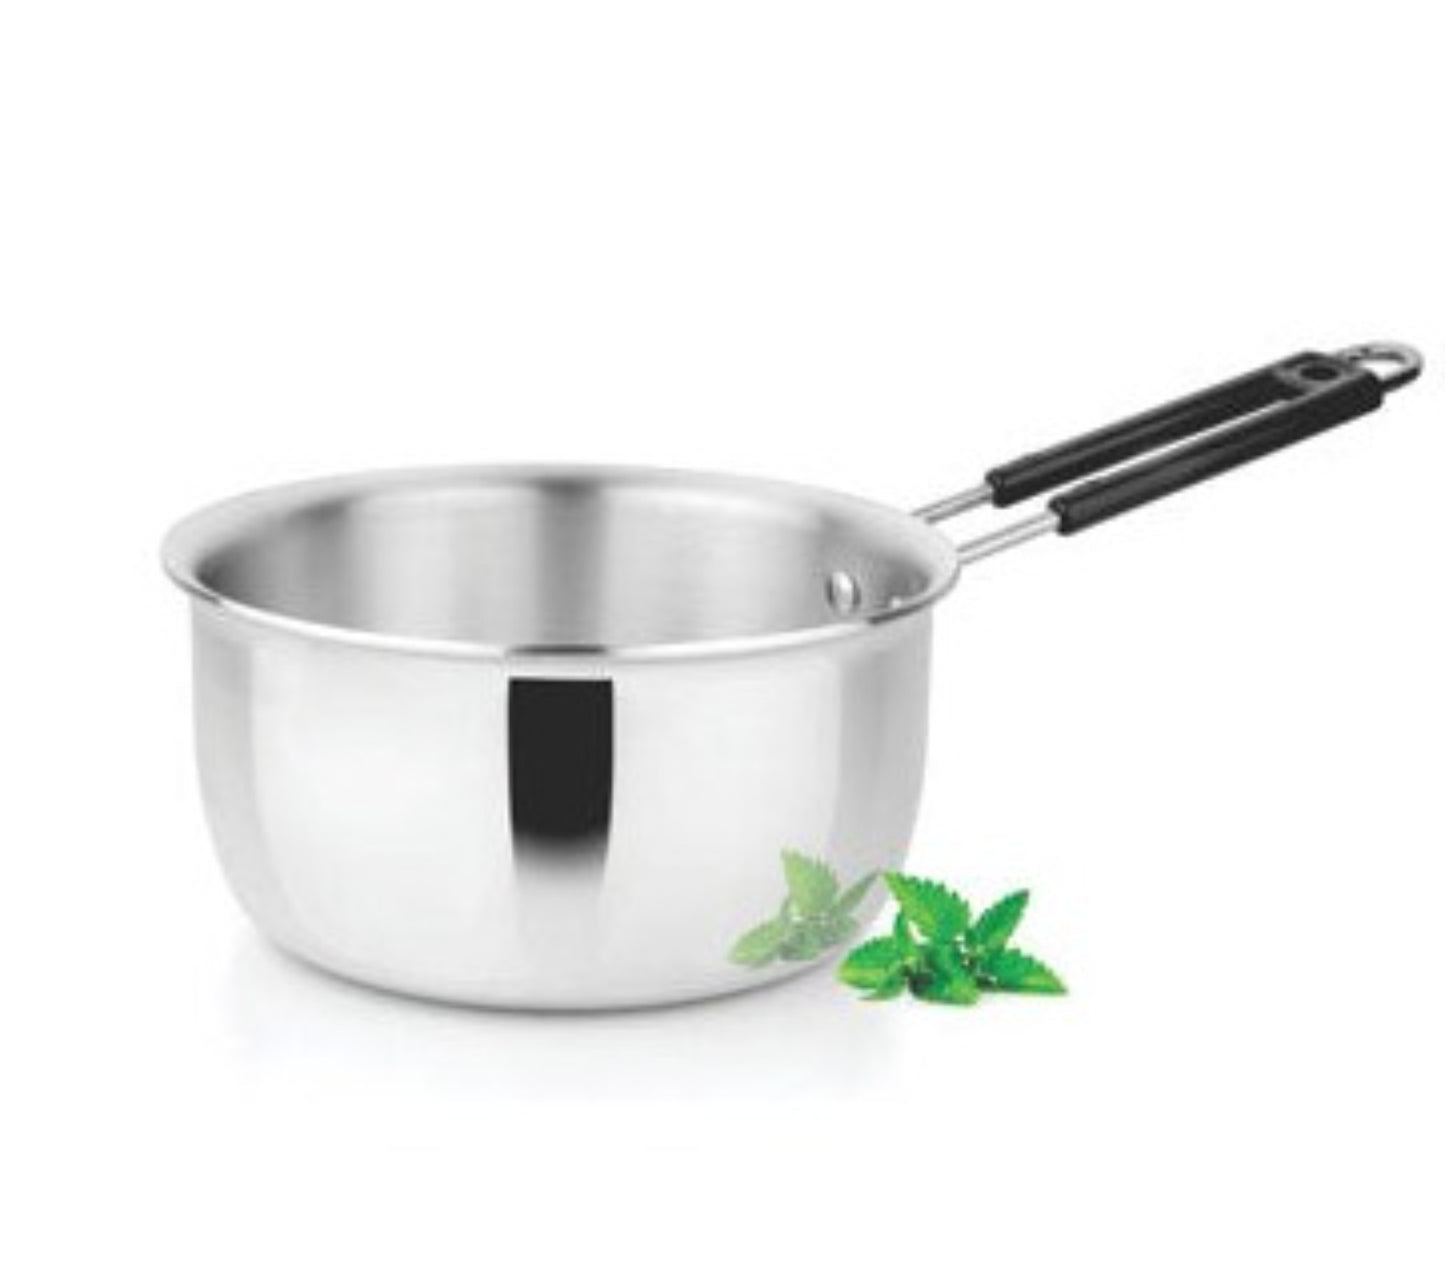 13” Stainless Steel Sauce Pan With Handle